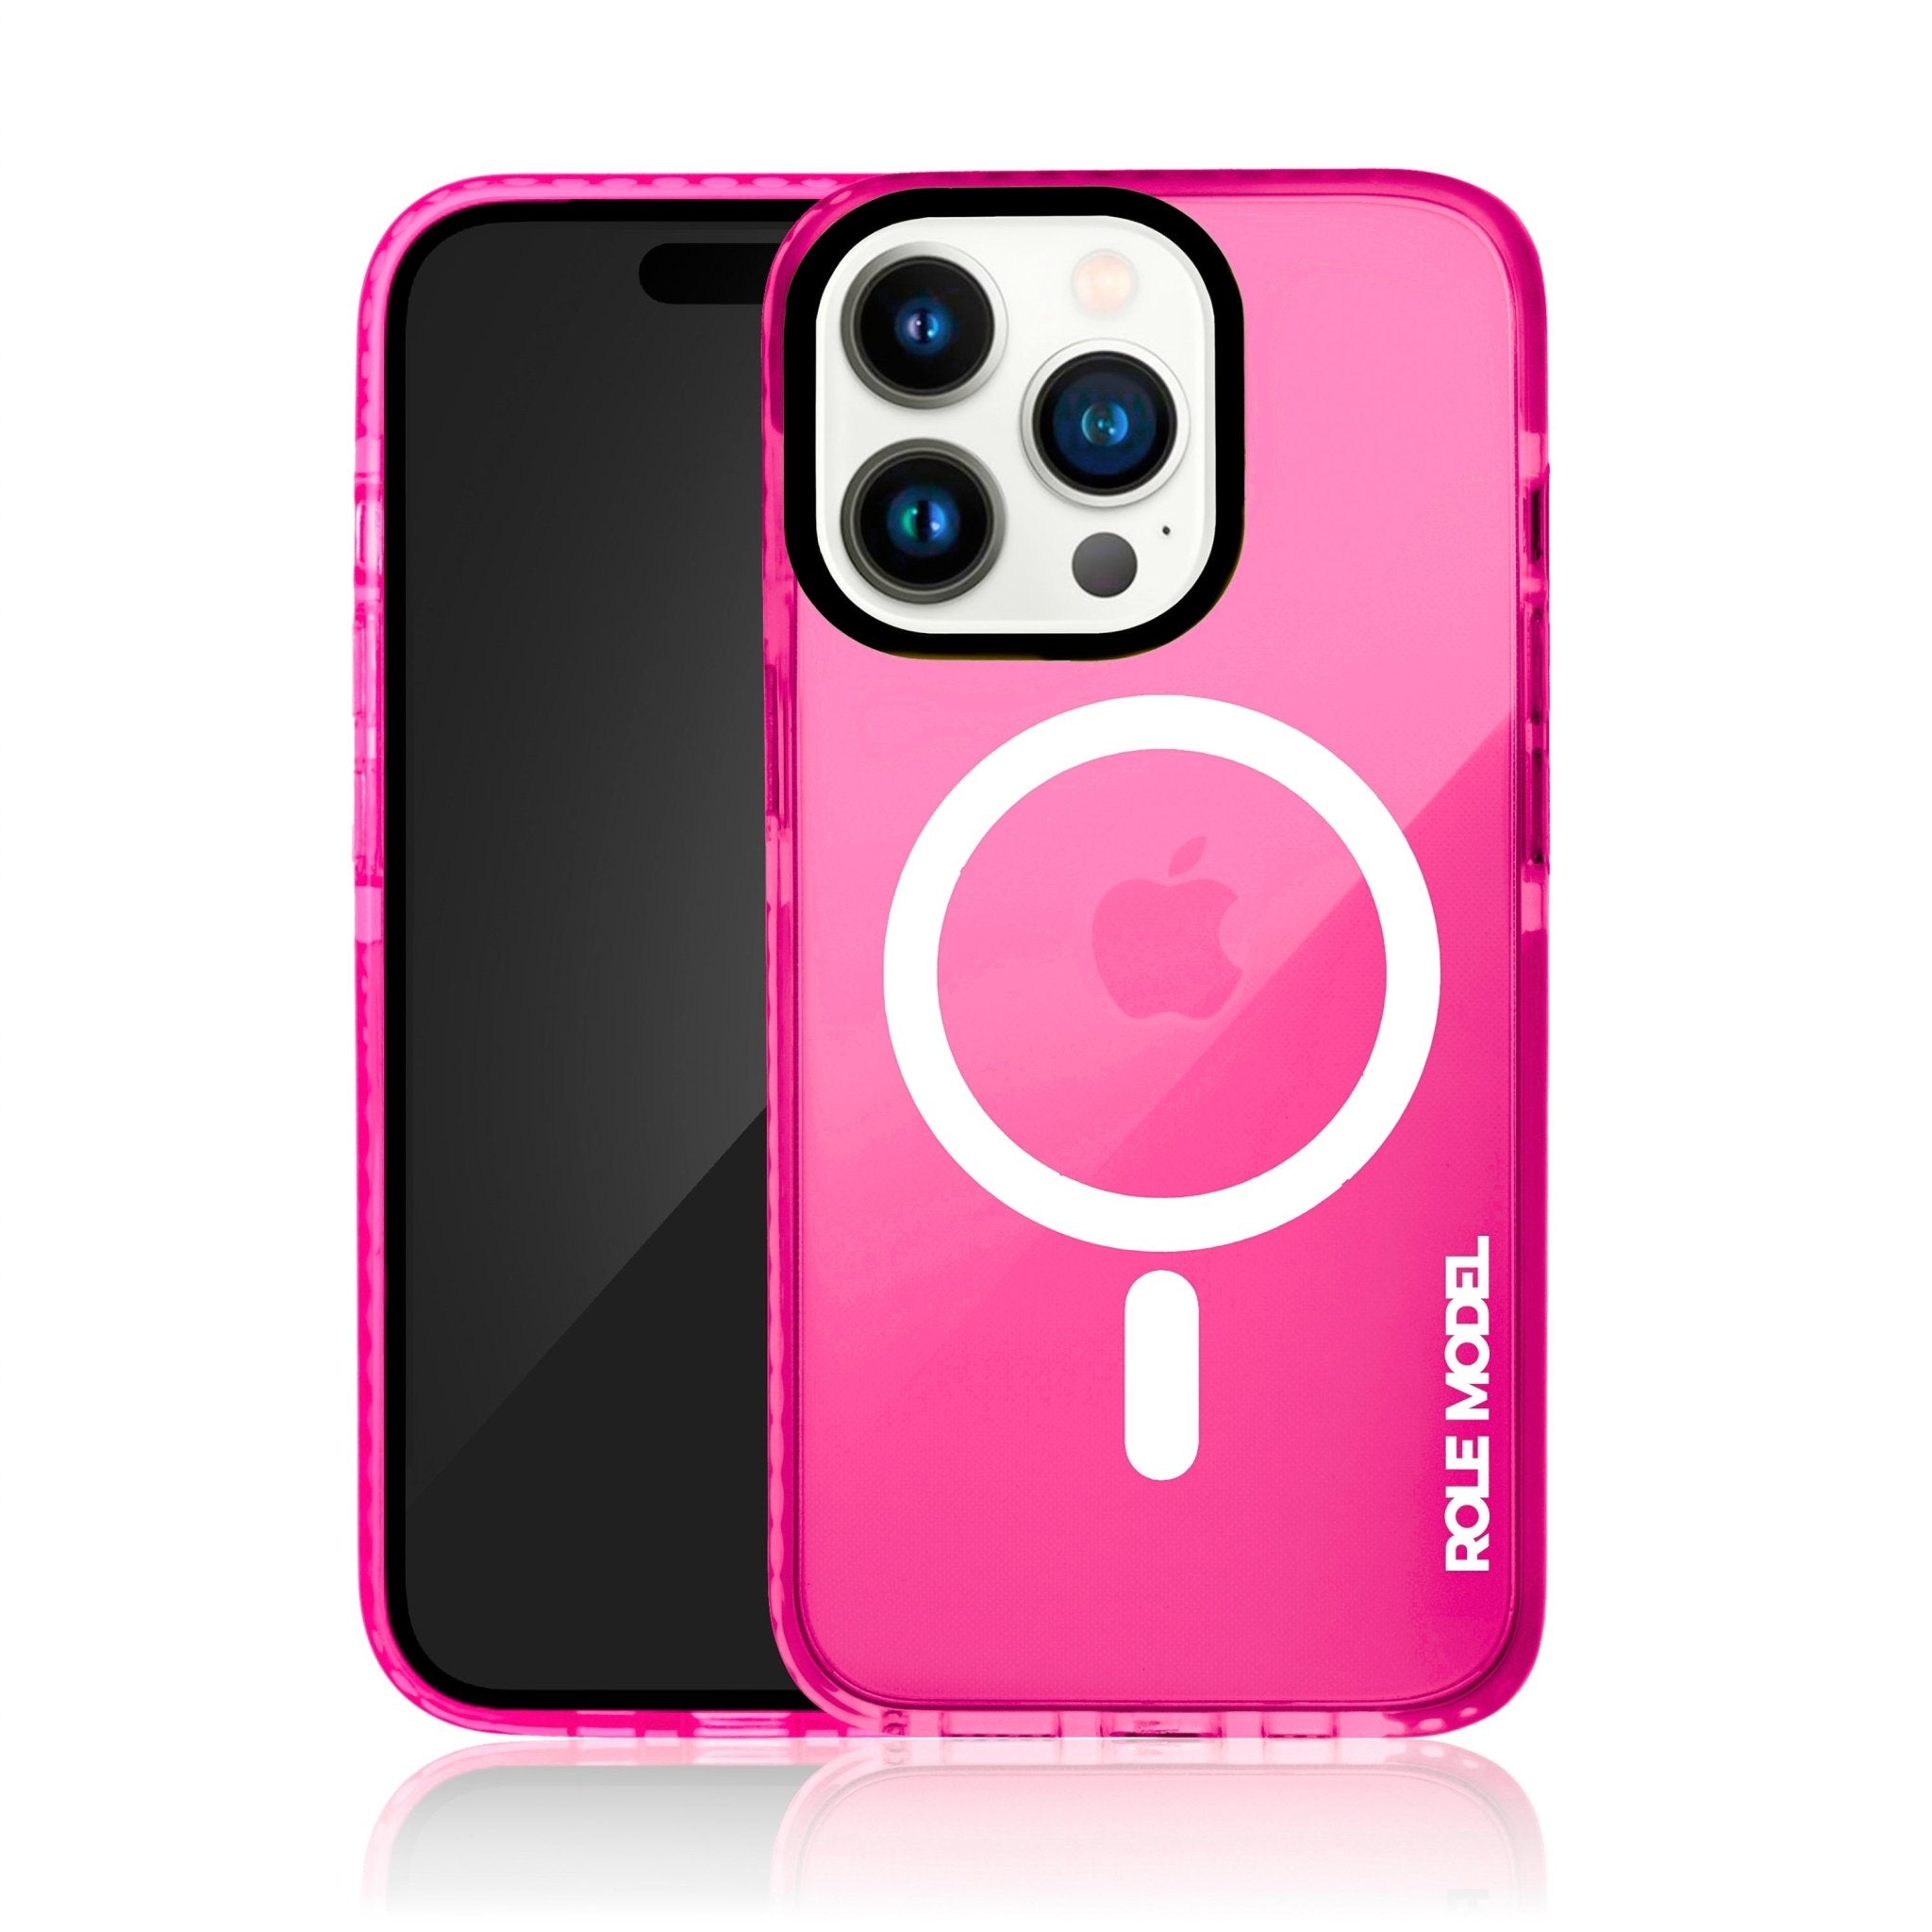 Cybercase™ Candy Pink Edition - ROLE MODEL